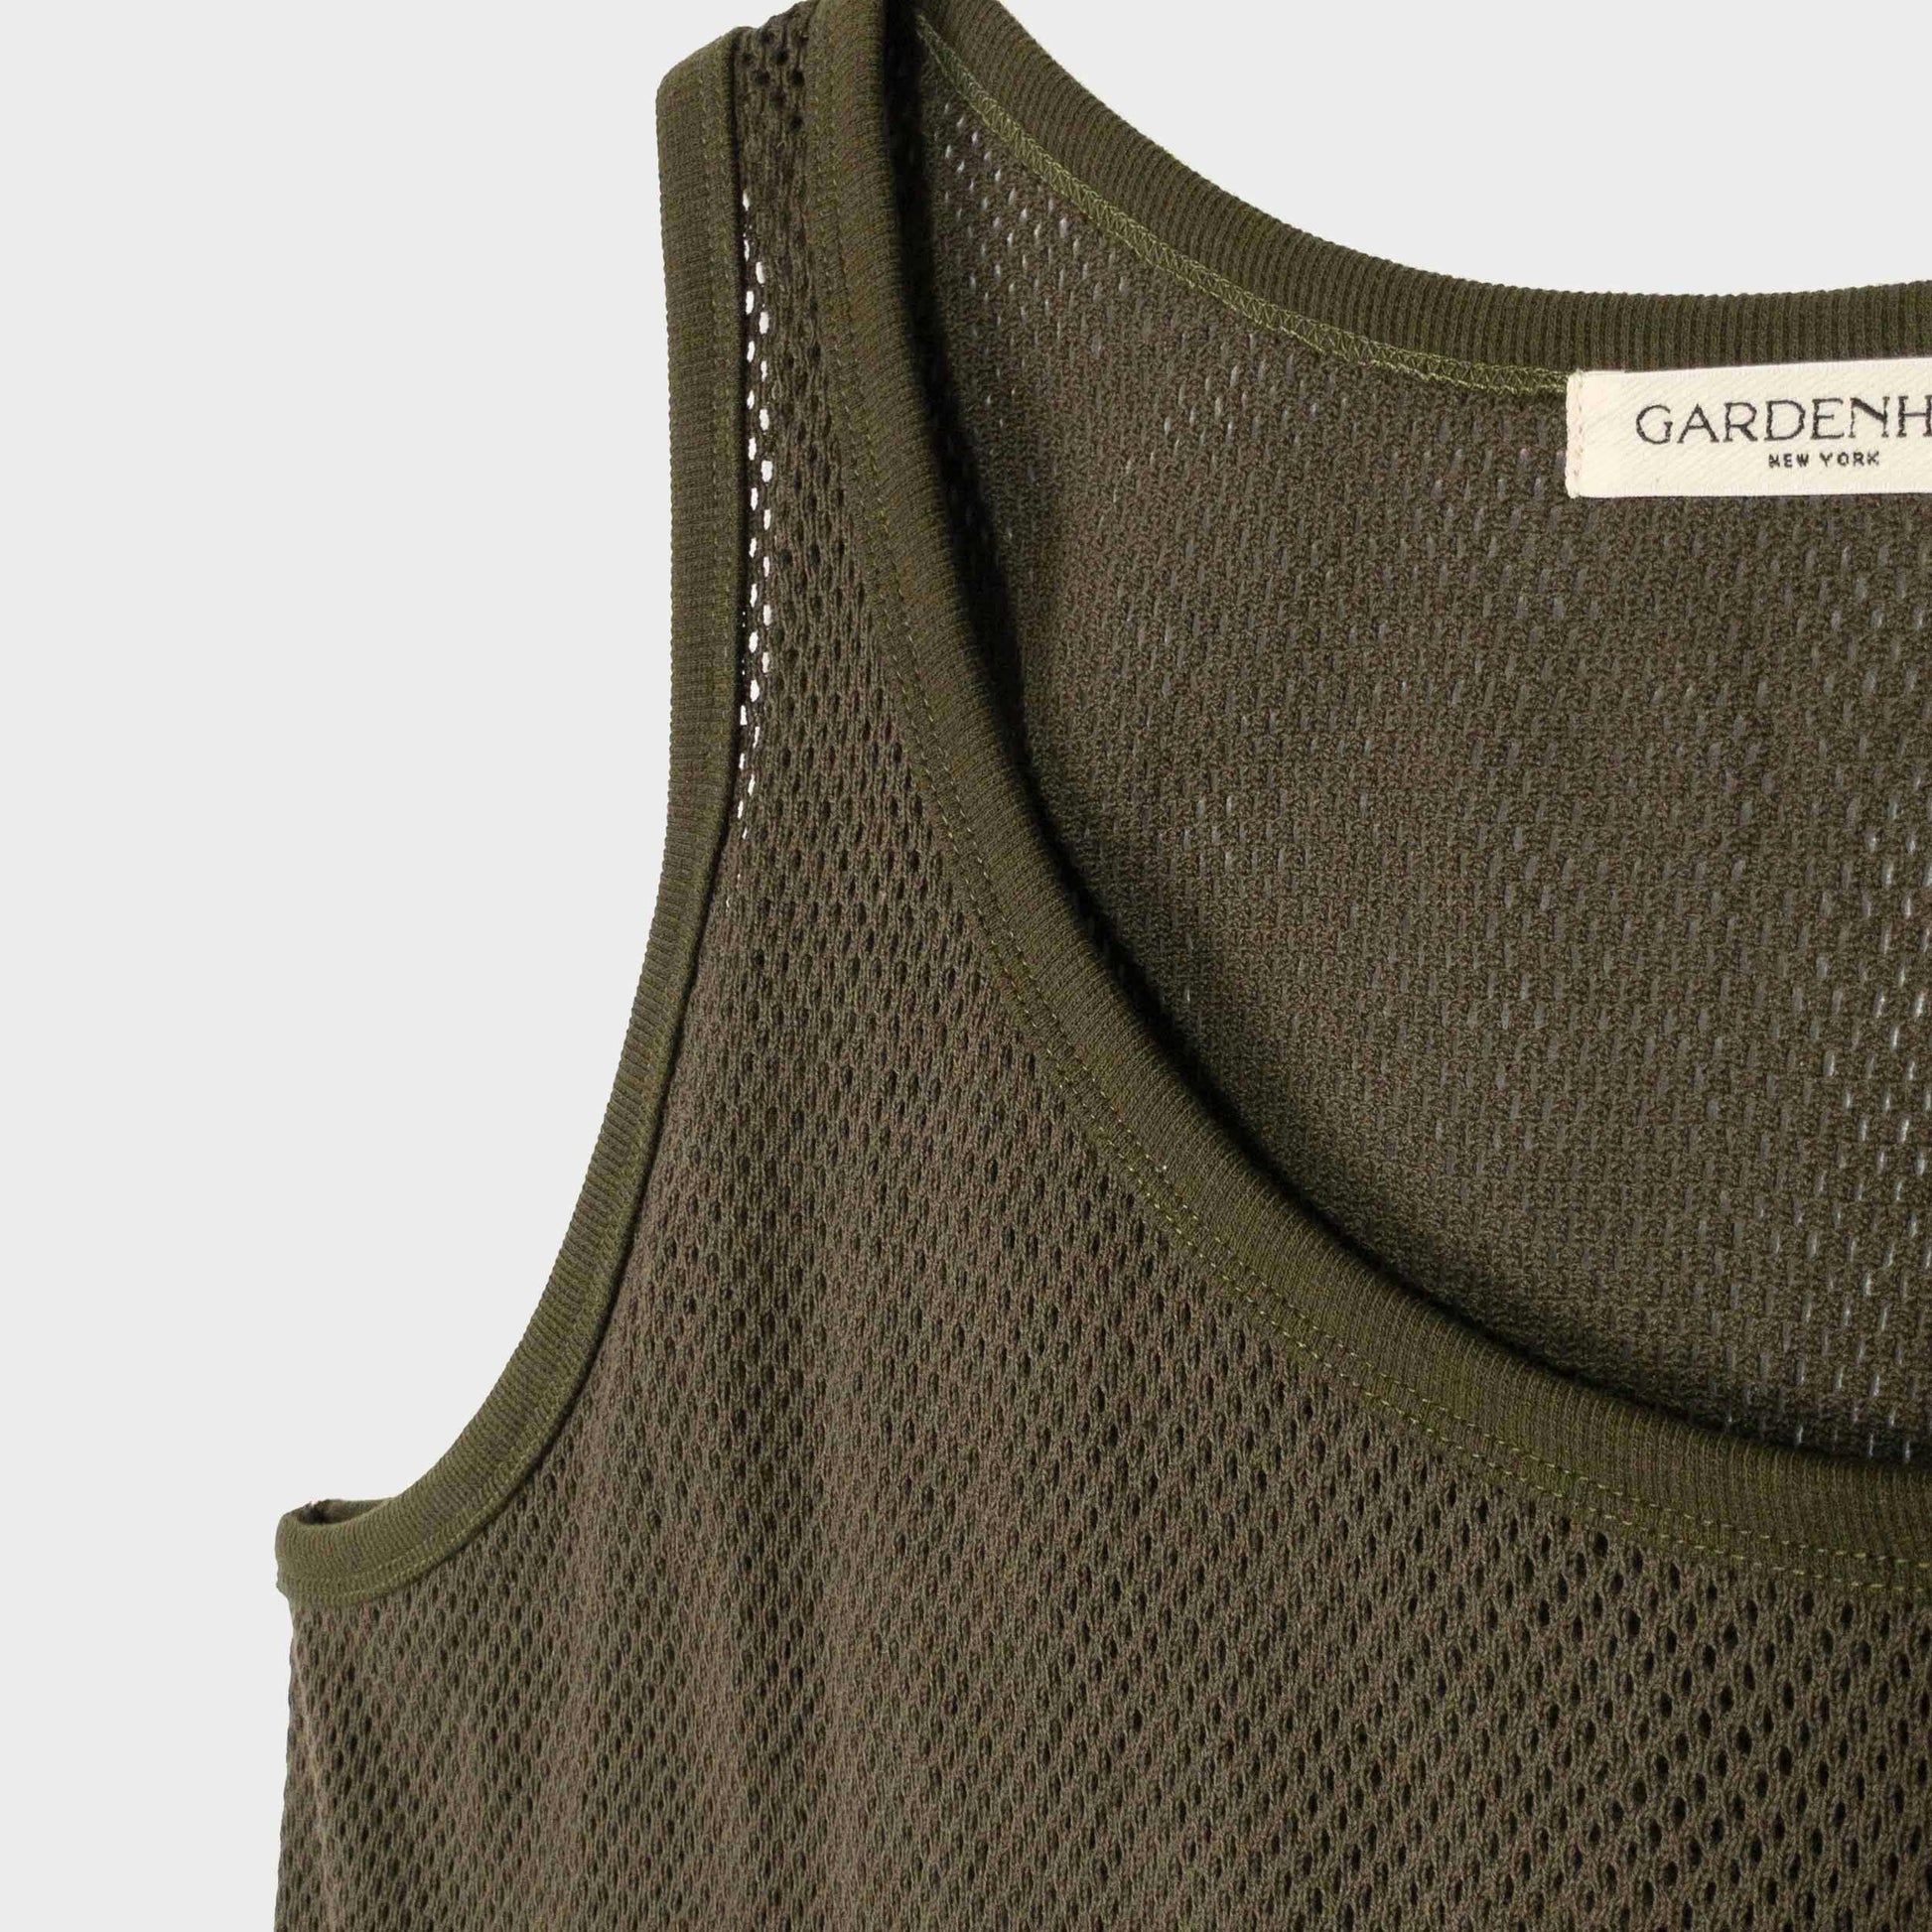 Cotton Mesh Tank Top in Drab Olive